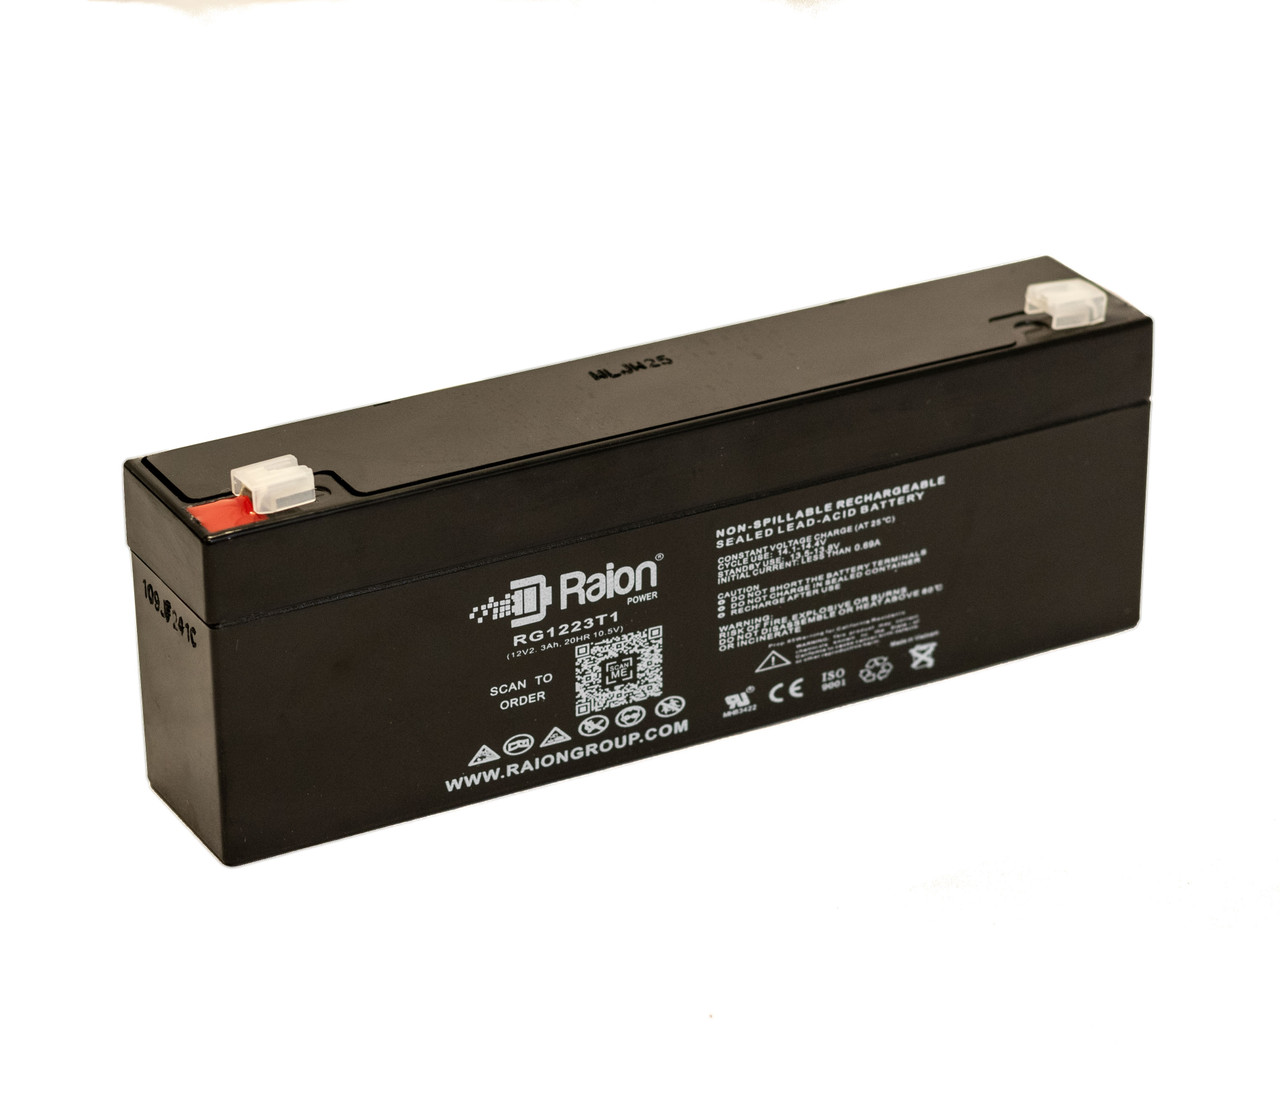 Raion Power RG1223T1 Replacement Battery for Datex-Ohmeda BIOX 3740 Pulse Oximeter